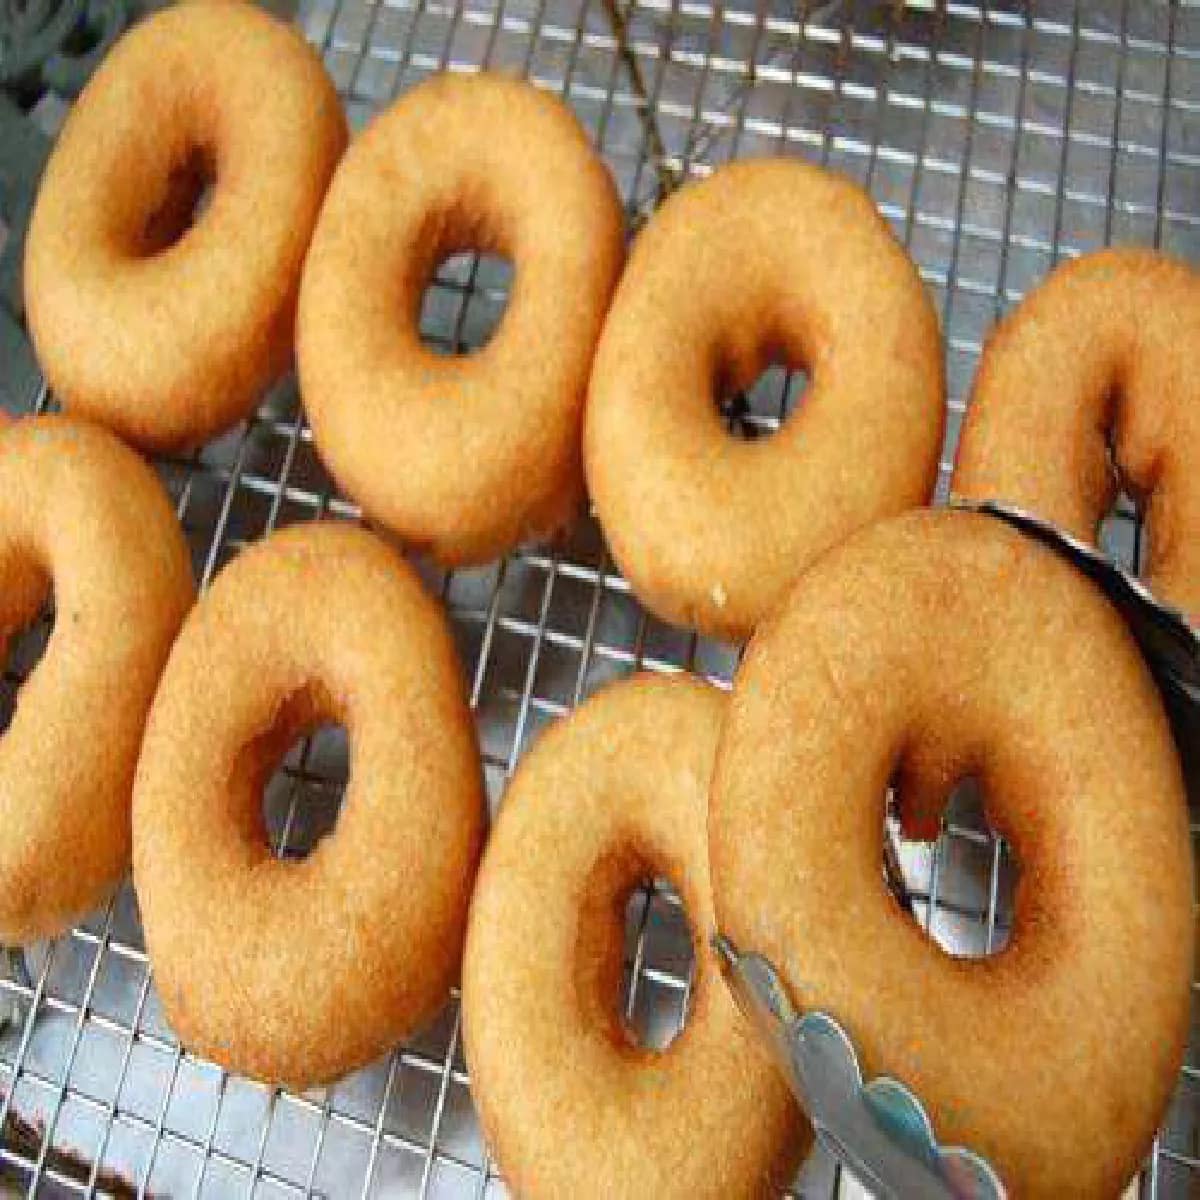 Homemade vanilla glazed doughnuts that taste like doughnuts from your favorite store but are more delicious, yet they are made from the comfort of your home